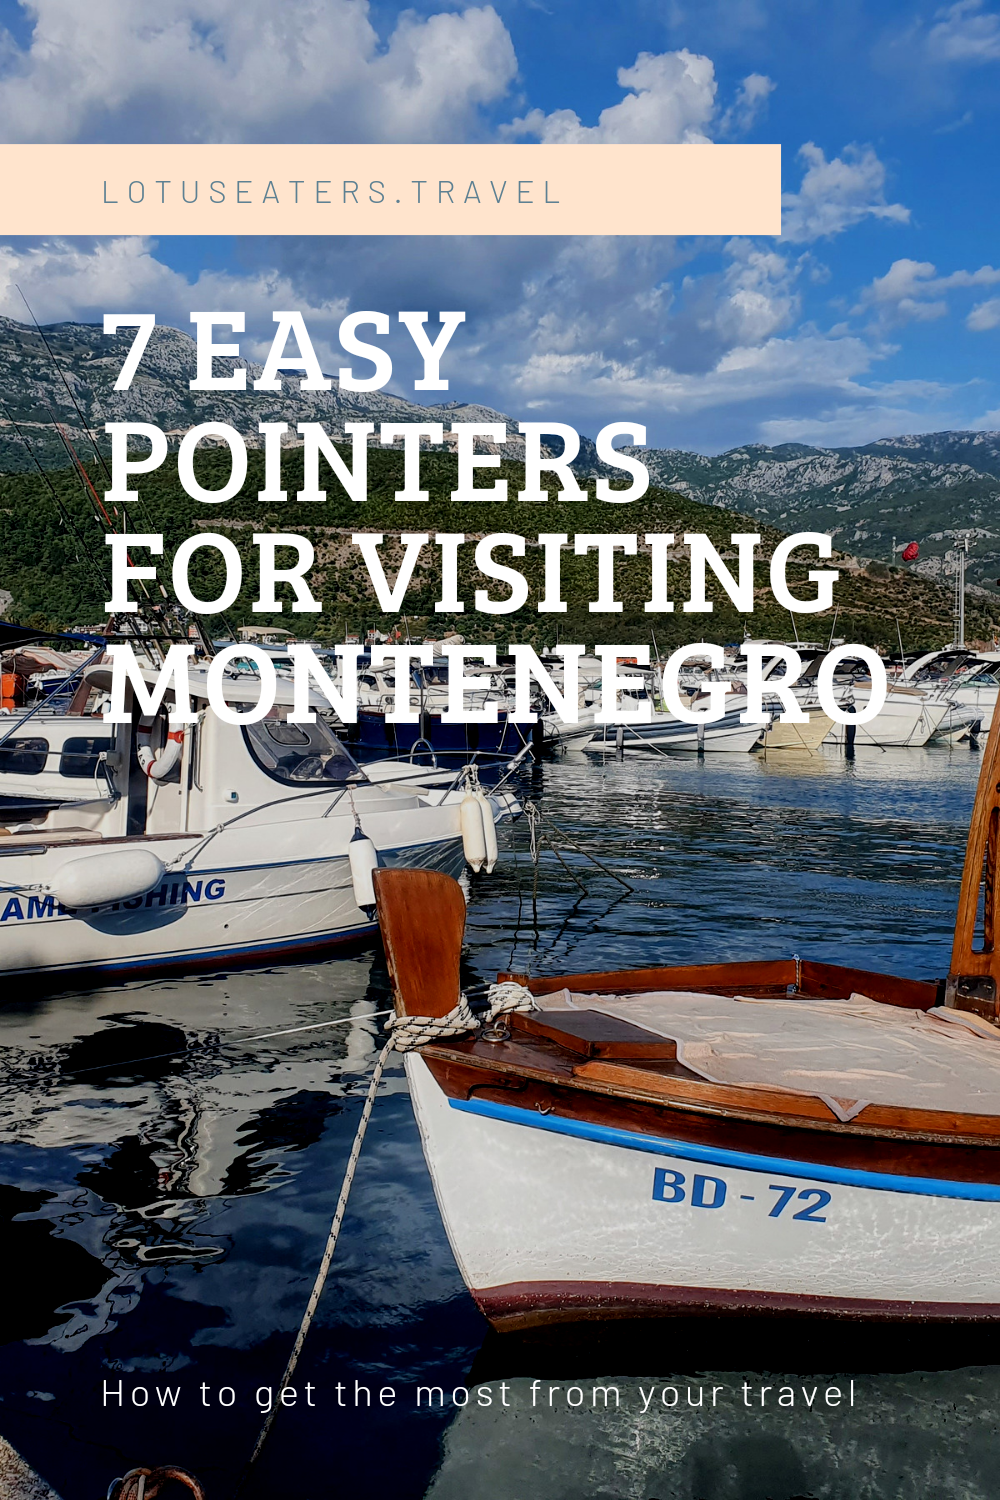 7 Easy Pointers for Visiting Montenegro